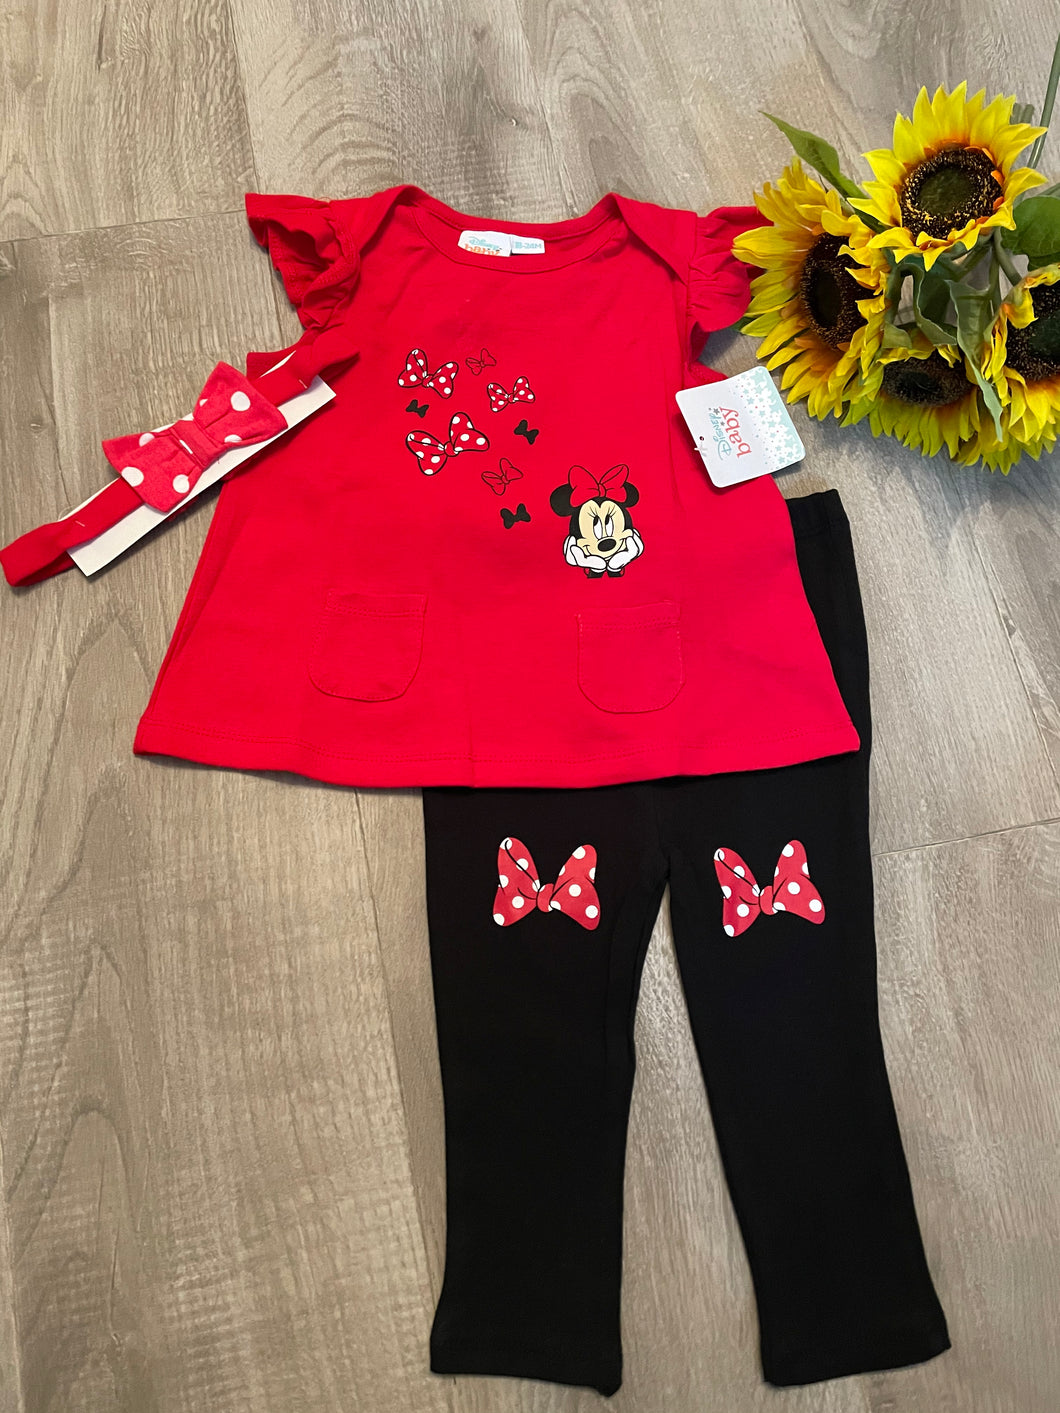 Minnie Mouse T Shirt, legging and headband outfit